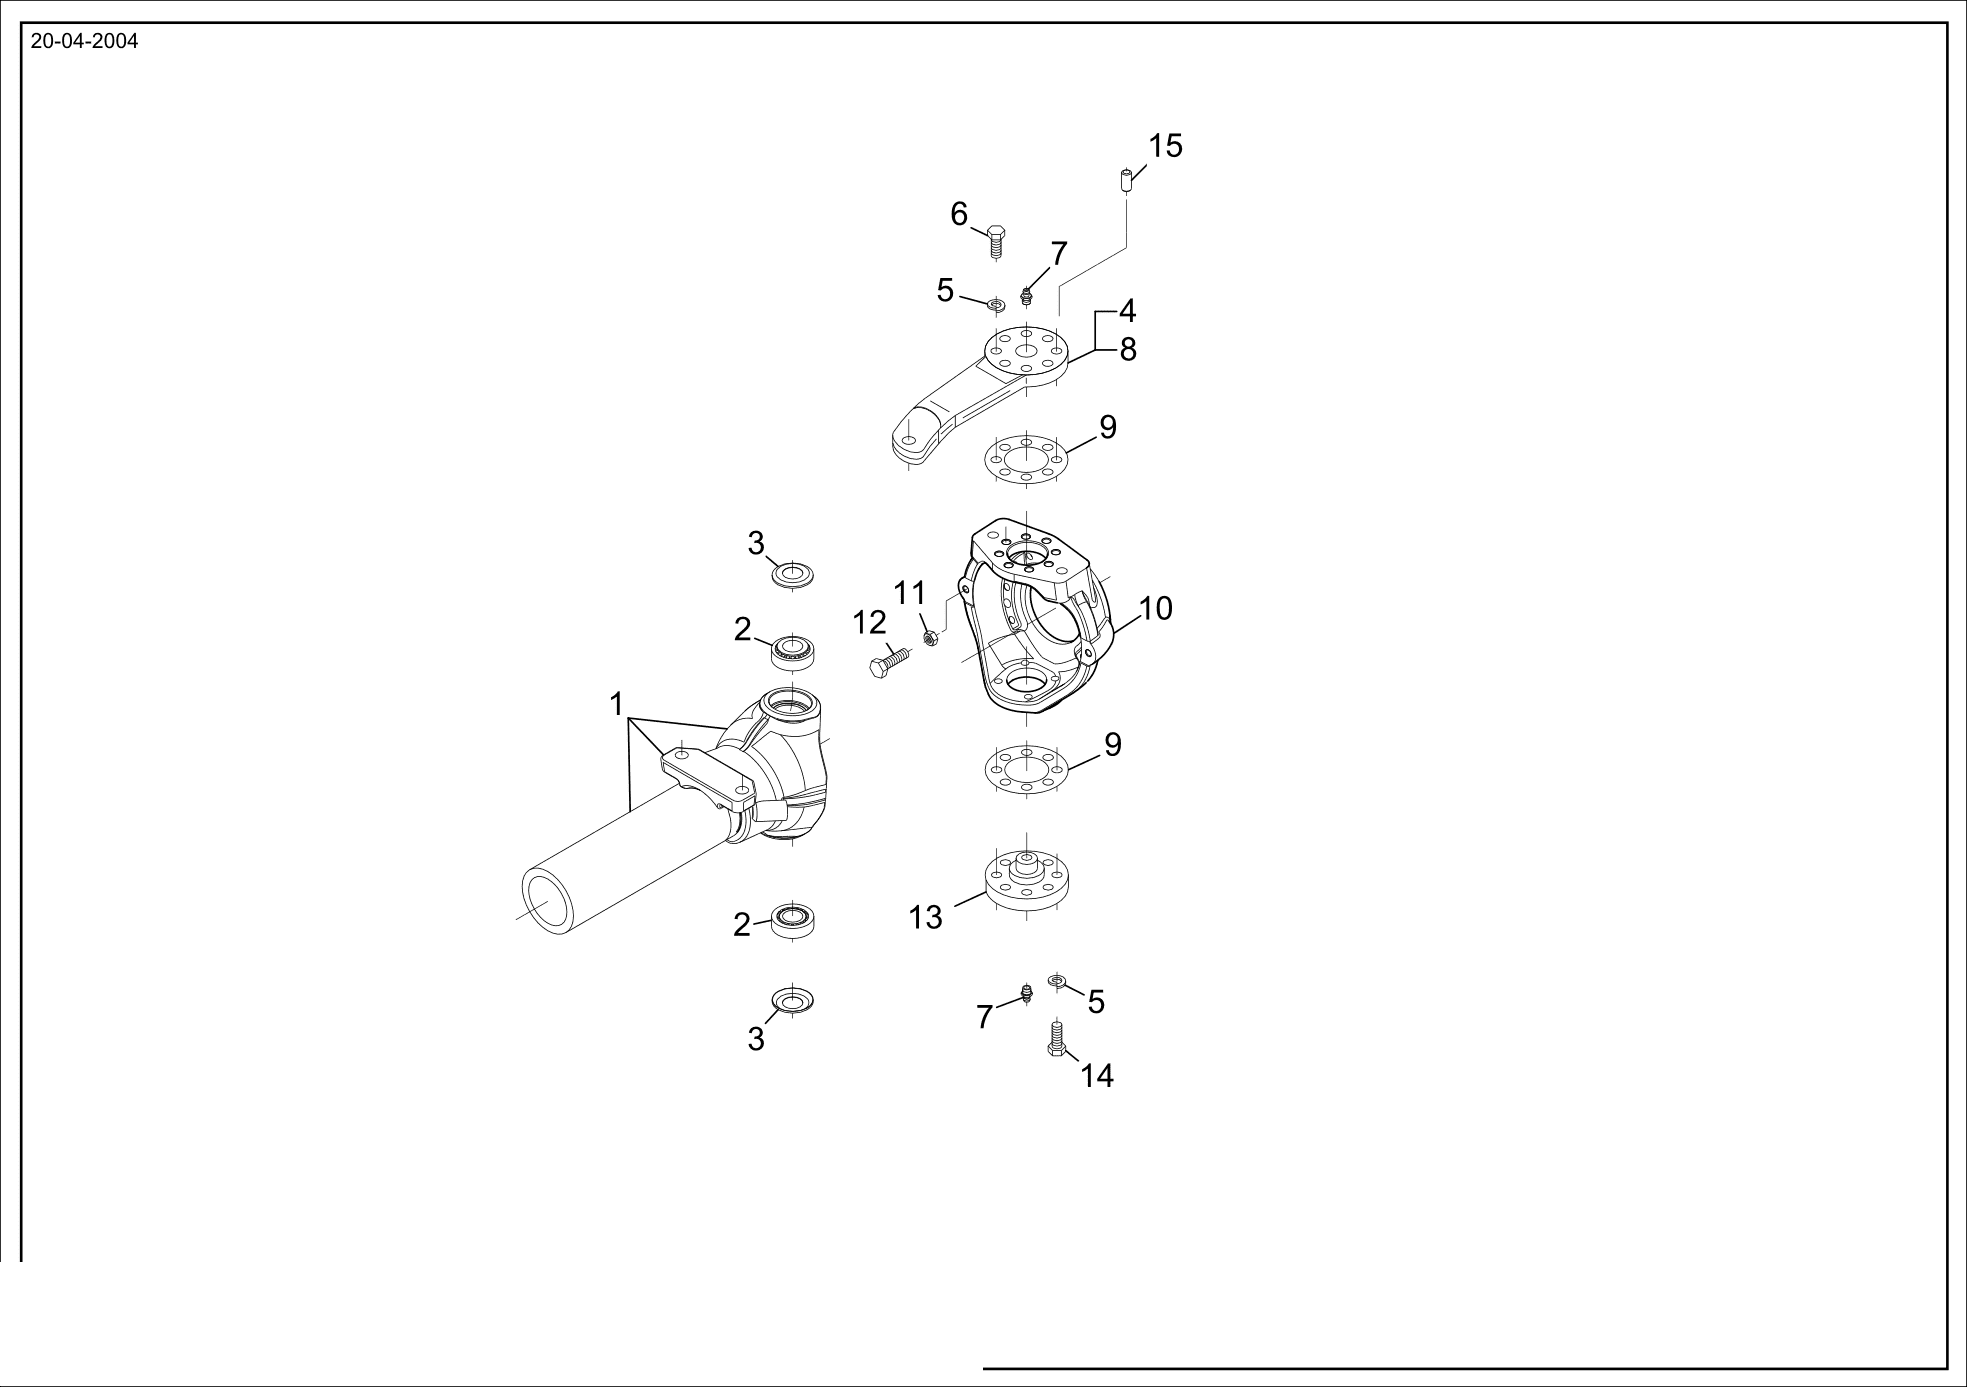 drawing for WIRTGEN GROUP 11075 - DUST EXCLUDER (figure 3)